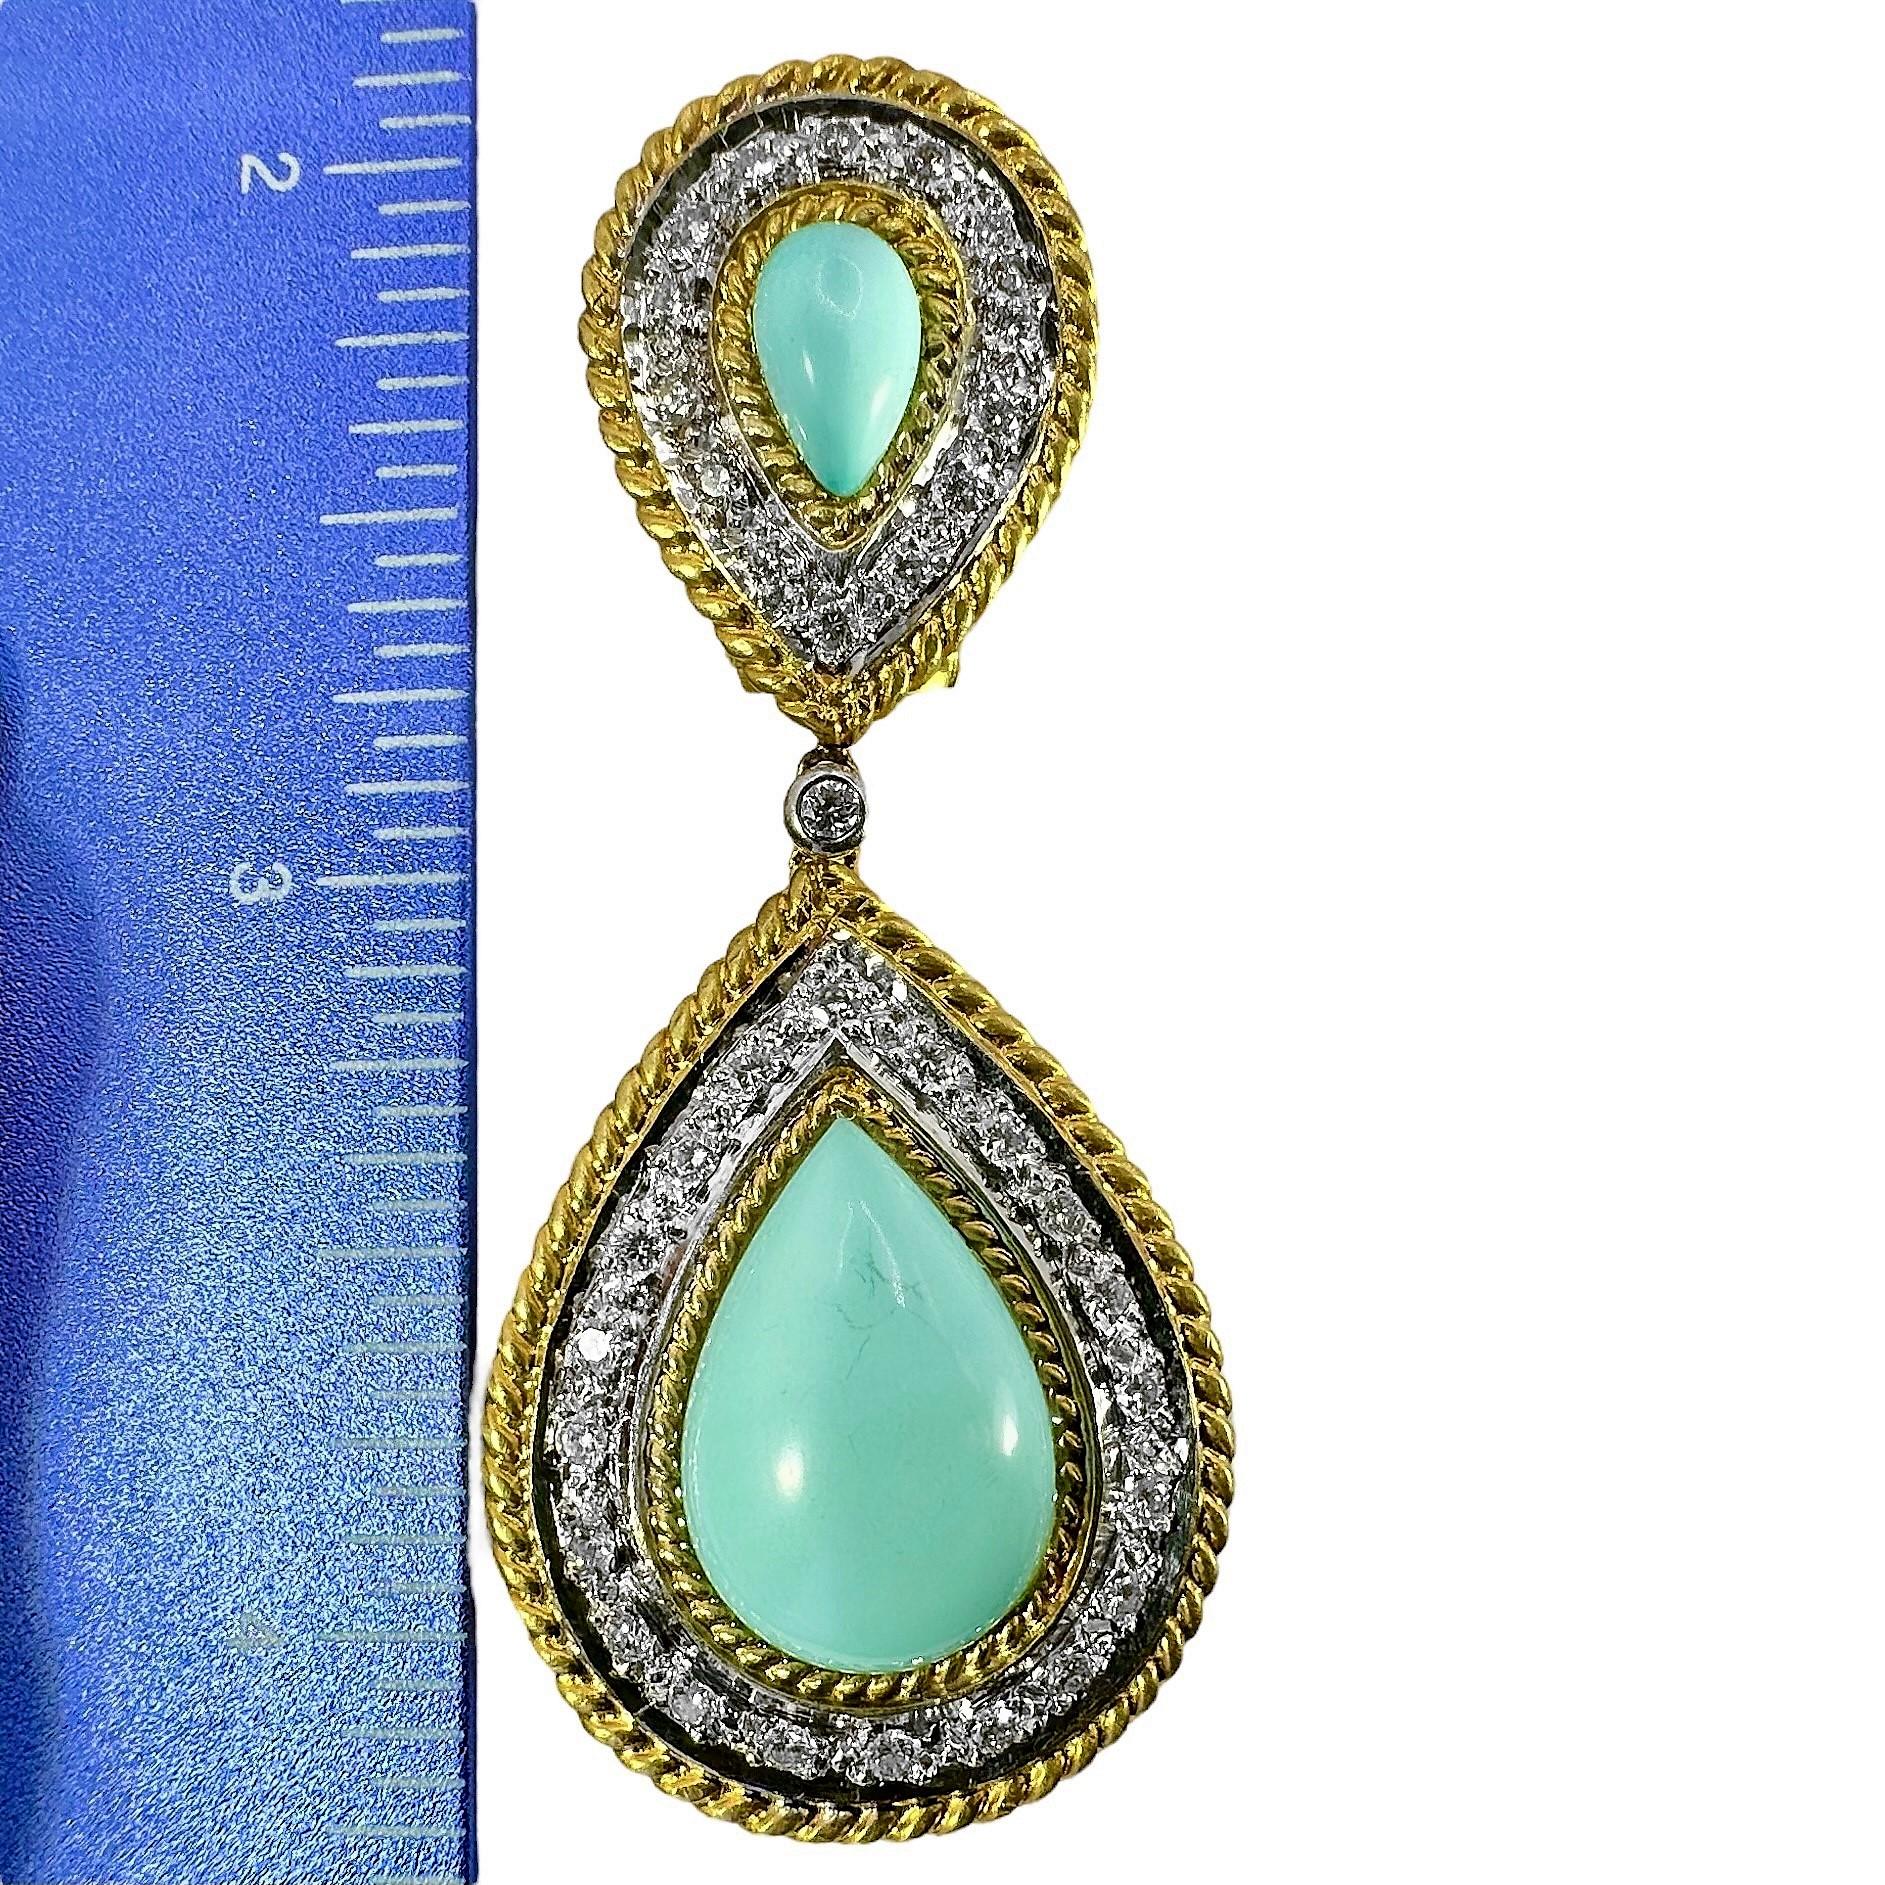 Brilliant Cut Elegant Vintage 18k Yellow Gold, Diamond and Persian Turquoise Earrings For Sale